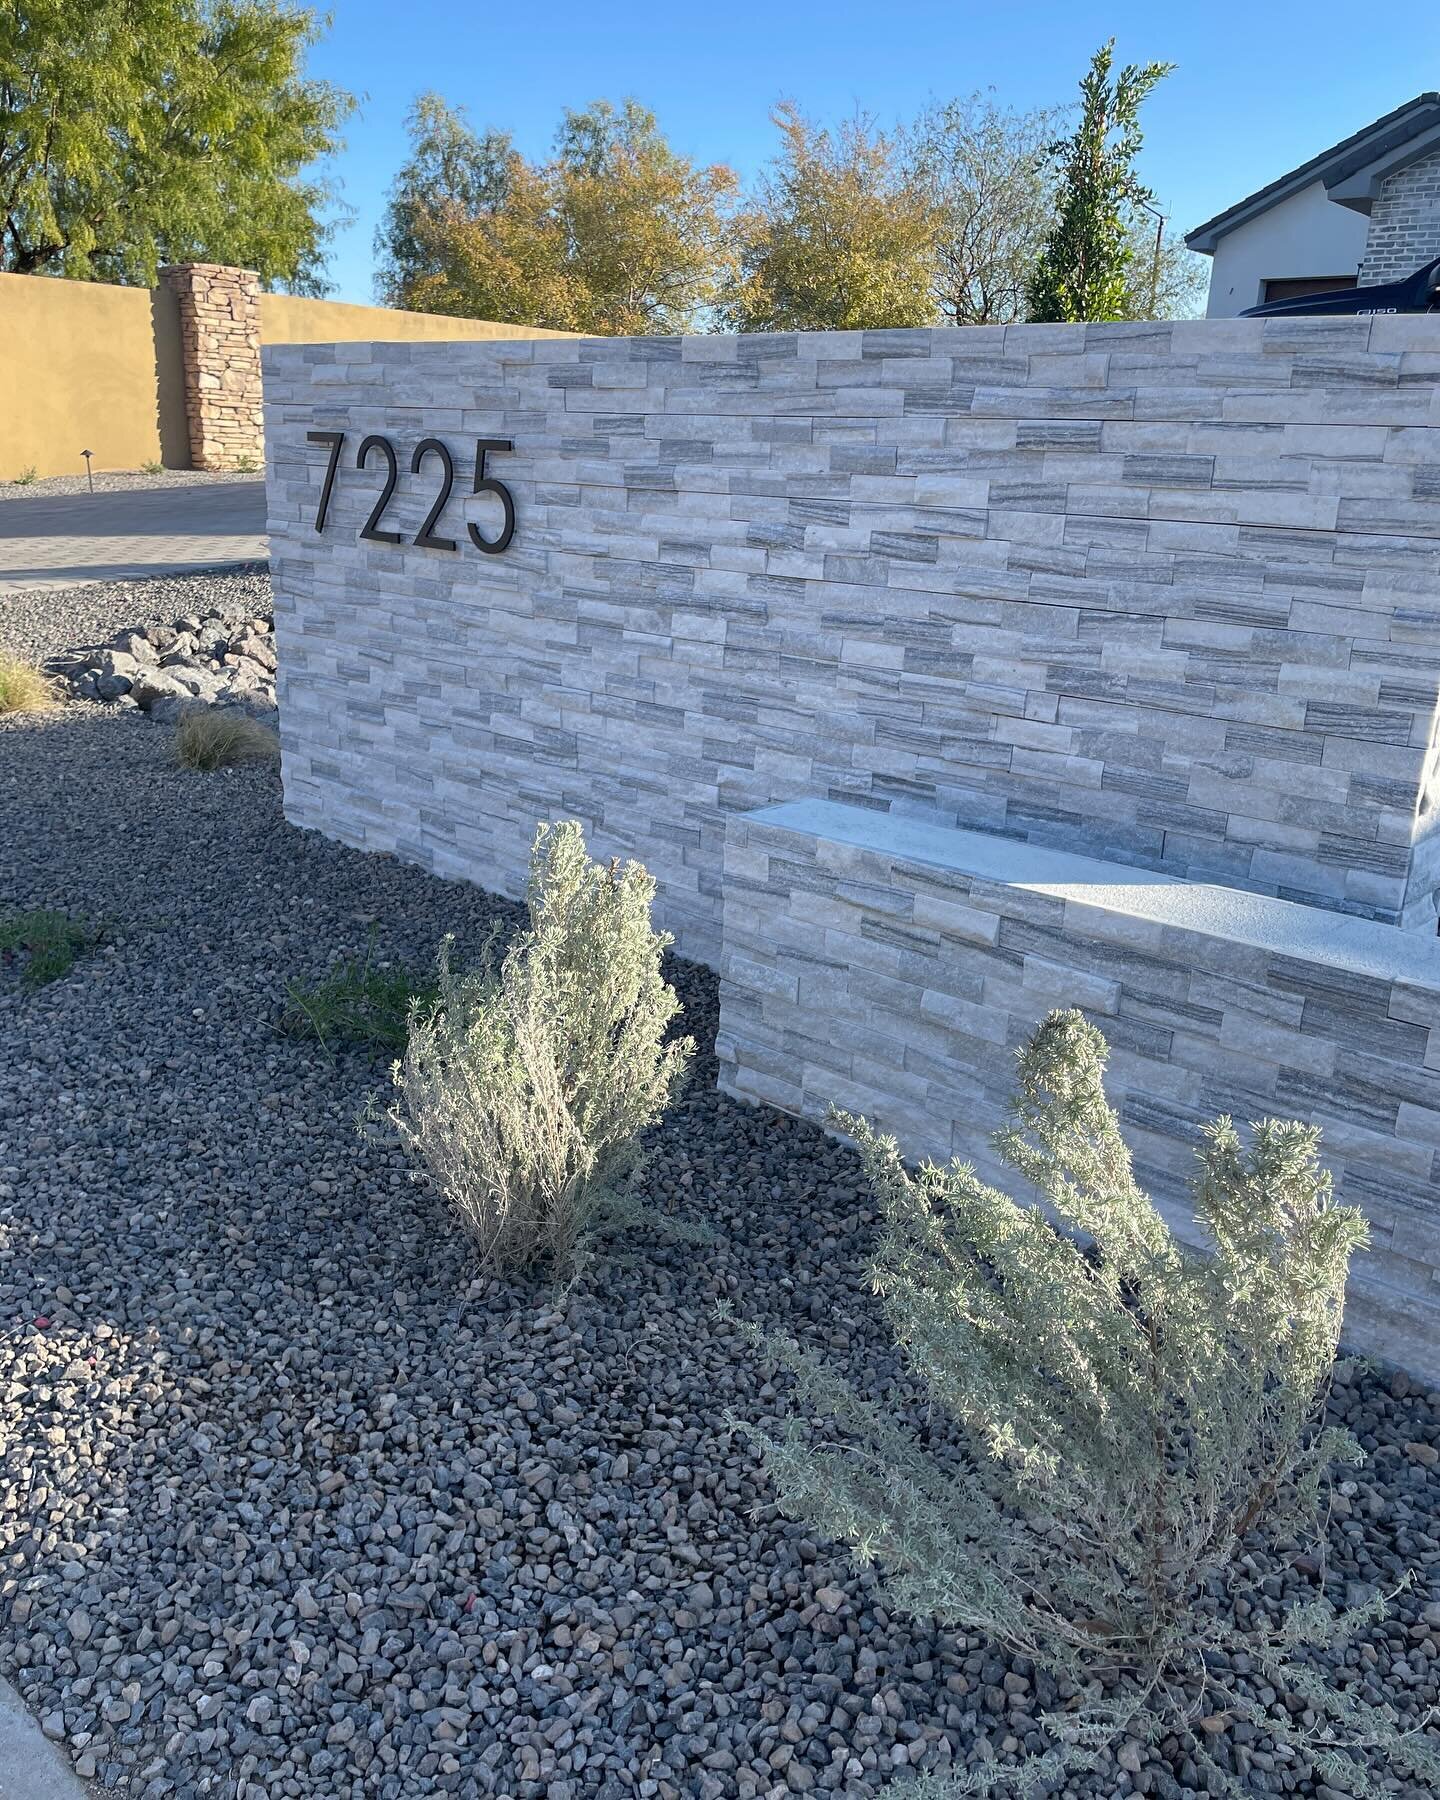 Front yard and courtyard refresh! We installed a decorative wall with house numbers, placed planters around the courtyard entrance, and installed beautiful trellises to the courtyard space. 🤩 More soon!